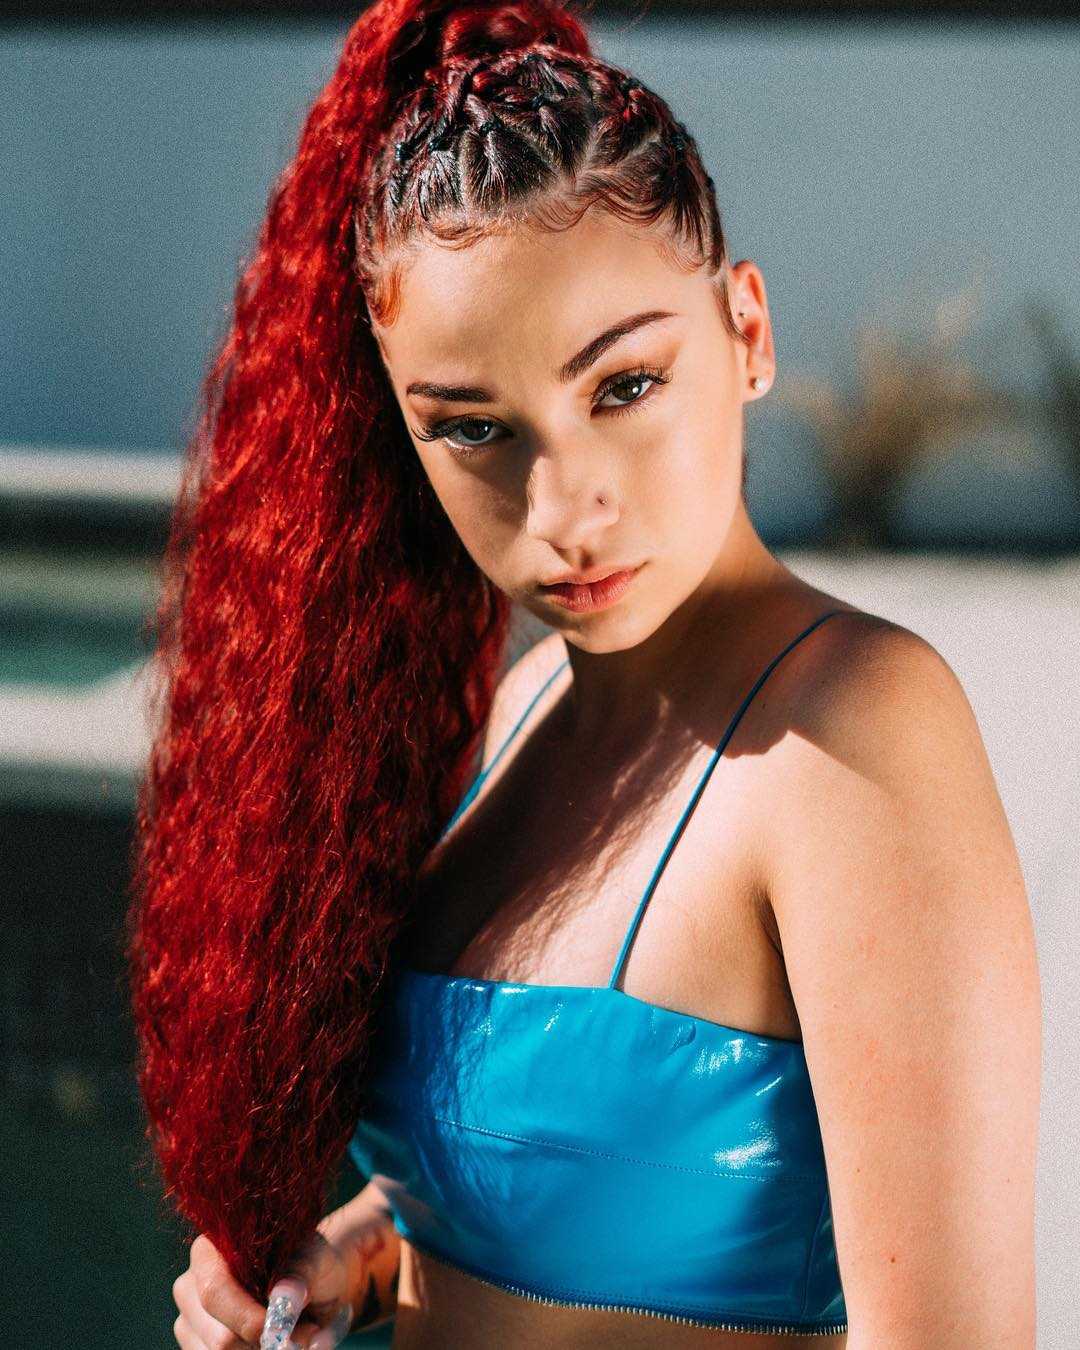 70+ Hot Pictures Of Danielle Bregoli aka Bhad Bhabie Which Will Win Your Heart 24